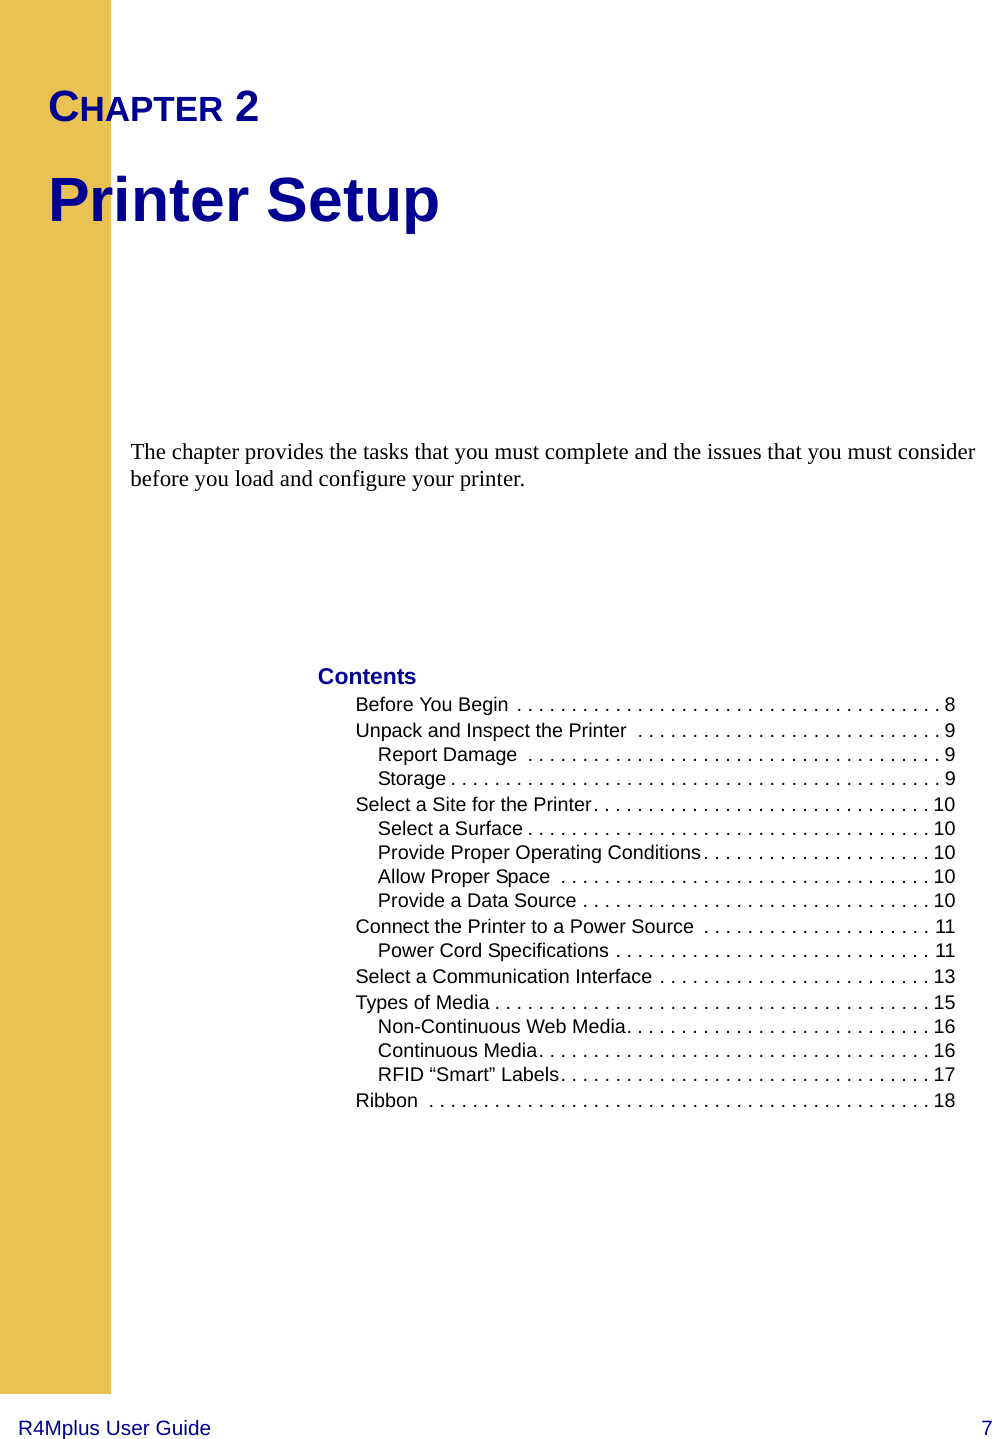 R4Mplus User Guide  7CHAPTER 2Printer SetupThe chapter provides the tasks that you must complete and the issues that you must consider before you load and configure your printer.ContentsBefore You Begin . . . . . . . . . . . . . . . . . . . . . . . . . . . . . . . . . . . . . . . 8Unpack and Inspect the Printer  . . . . . . . . . . . . . . . . . . . . . . . . . . . . 9Report Damage  . . . . . . . . . . . . . . . . . . . . . . . . . . . . . . . . . . . . . . 9Storage . . . . . . . . . . . . . . . . . . . . . . . . . . . . . . . . . . . . . . . . . . . . . 9Select a Site for the Printer. . . . . . . . . . . . . . . . . . . . . . . . . . . . . . . 10Select a Surface . . . . . . . . . . . . . . . . . . . . . . . . . . . . . . . . . . . . . 10Provide Proper Operating Conditions. . . . . . . . . . . . . . . . . . . . . 10Allow Proper Space  . . . . . . . . . . . . . . . . . . . . . . . . . . . . . . . . . . 10Provide a Data Source . . . . . . . . . . . . . . . . . . . . . . . . . . . . . . . . 10Connect the Printer to a Power Source  . . . . . . . . . . . . . . . . . . . . . 11Power Cord Specifications . . . . . . . . . . . . . . . . . . . . . . . . . . . . . 11Select a Communication Interface . . . . . . . . . . . . . . . . . . . . . . . . . 13Types of Media . . . . . . . . . . . . . . . . . . . . . . . . . . . . . . . . . . . . . . . . 15Non-Continuous Web Media. . . . . . . . . . . . . . . . . . . . . . . . . . . . 16Continuous Media. . . . . . . . . . . . . . . . . . . . . . . . . . . . . . . . . . . . 16RFID “Smart” Labels. . . . . . . . . . . . . . . . . . . . . . . . . . . . . . . . . . 17Ribbon  . . . . . . . . . . . . . . . . . . . . . . . . . . . . . . . . . . . . . . . . . . . . . . 18